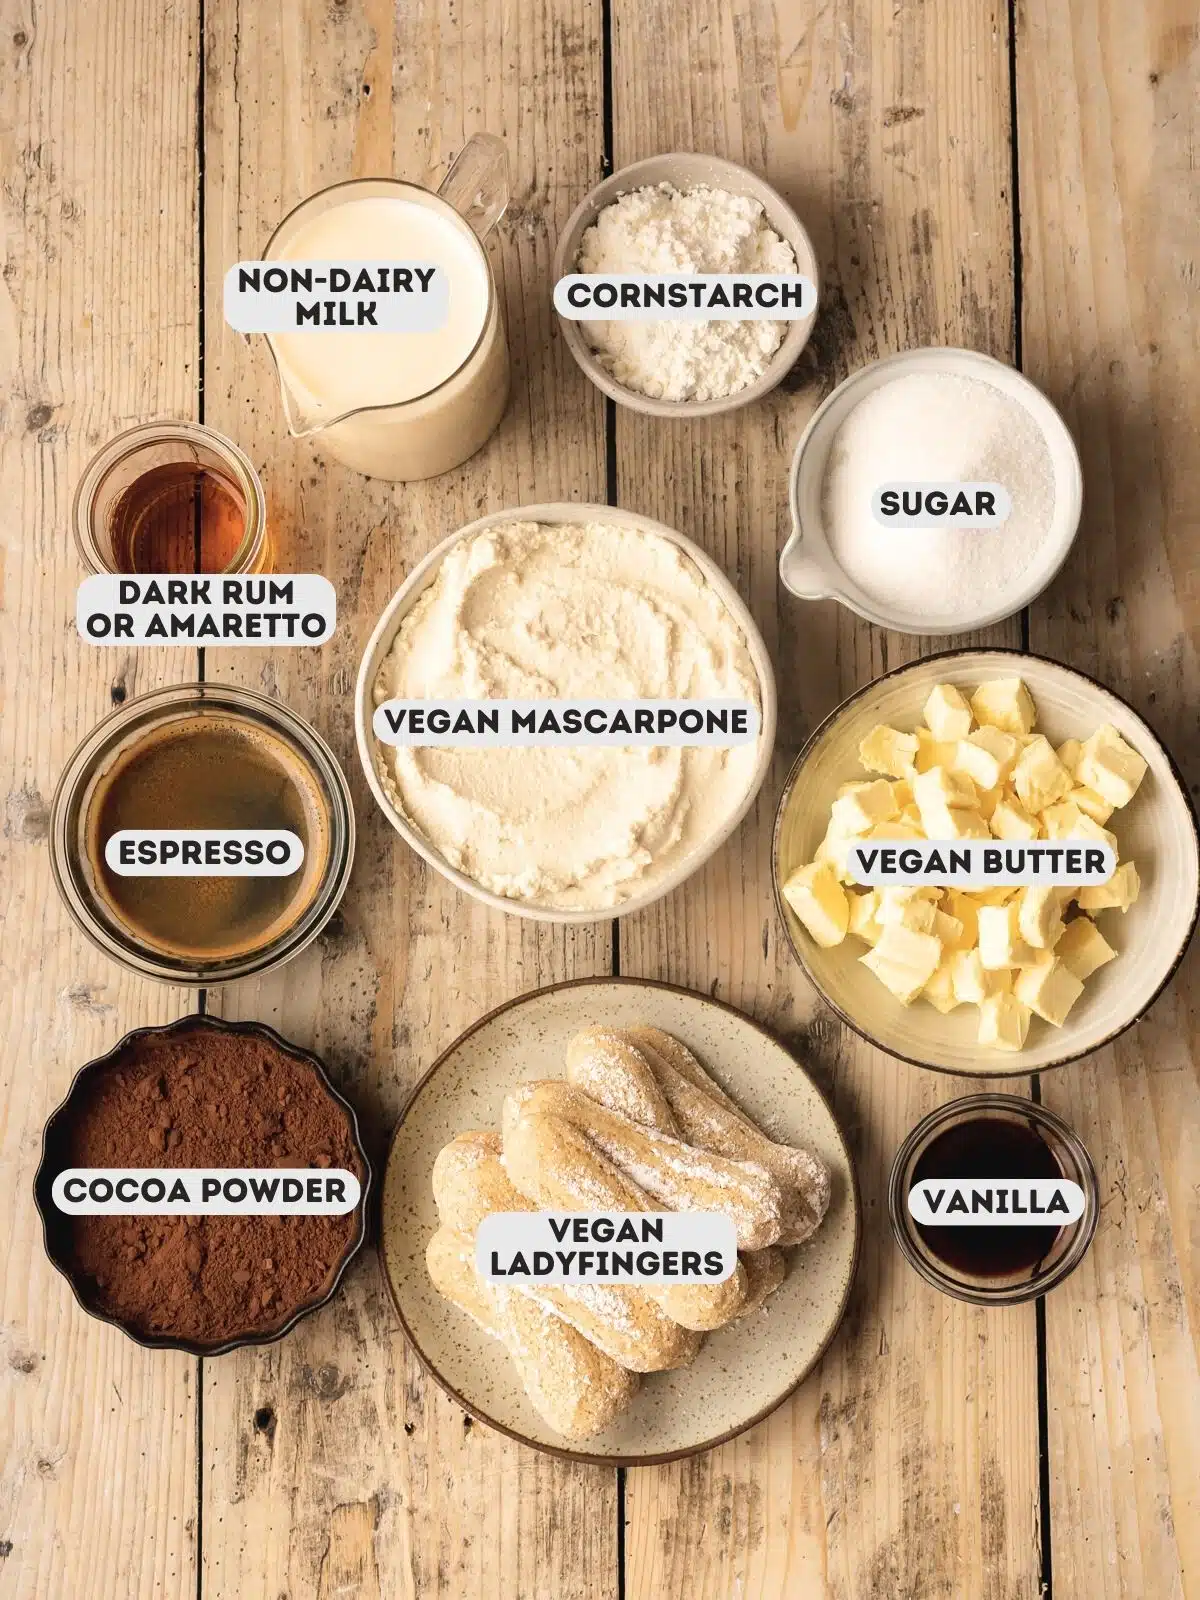 ingredients for vegan tiramisu measured out in bowls on a wooden surface.